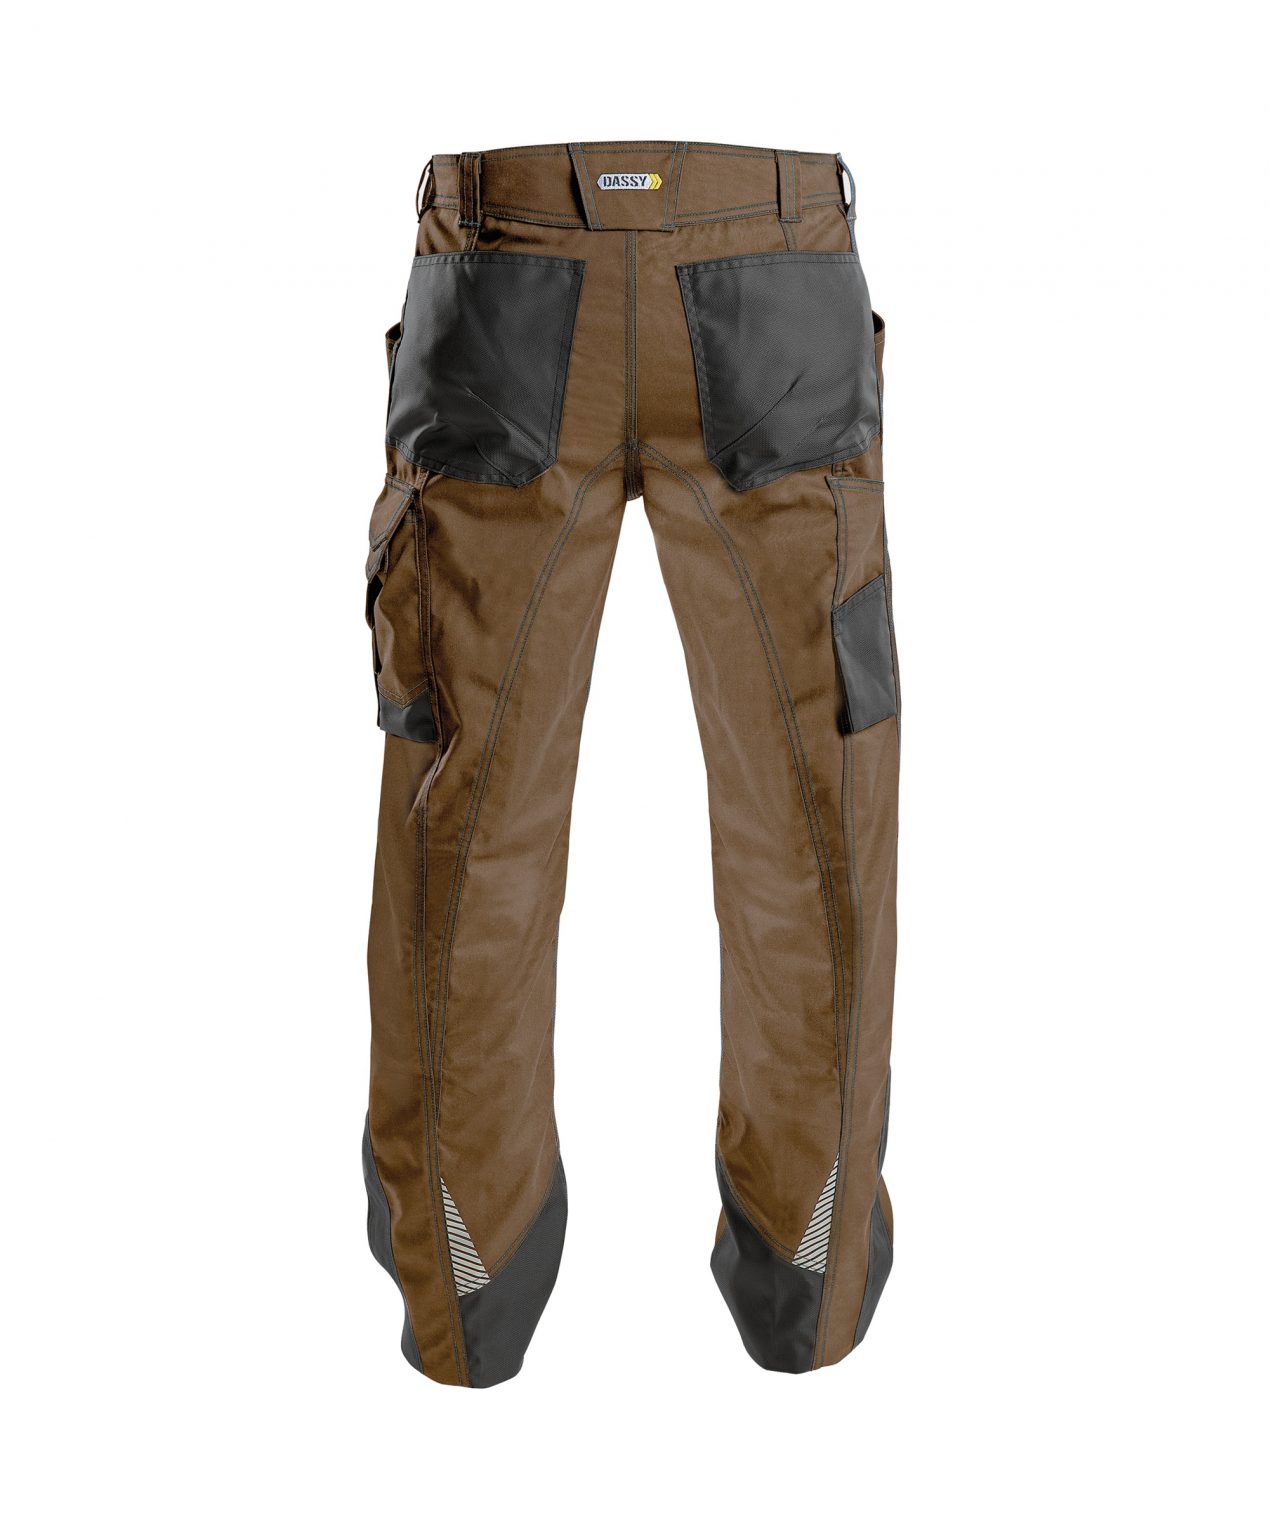 spectrum work trousers clay brown anthracite grey back